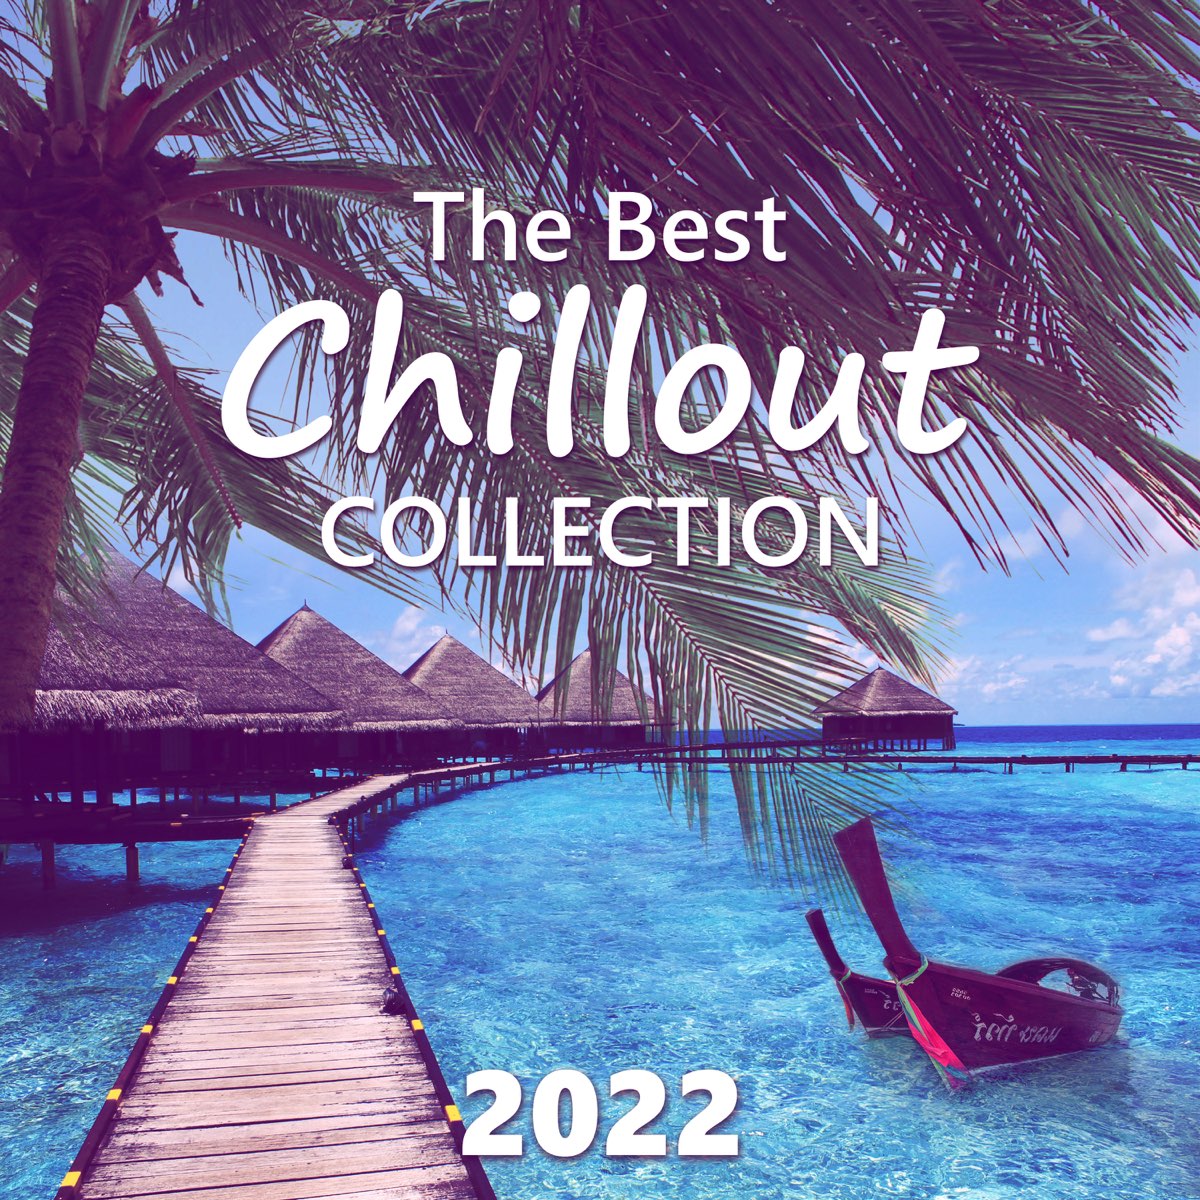 ‎the Best Chillout Collection 2022 Electronic Lounge Music Cocktail Bar Cafe Chill Out